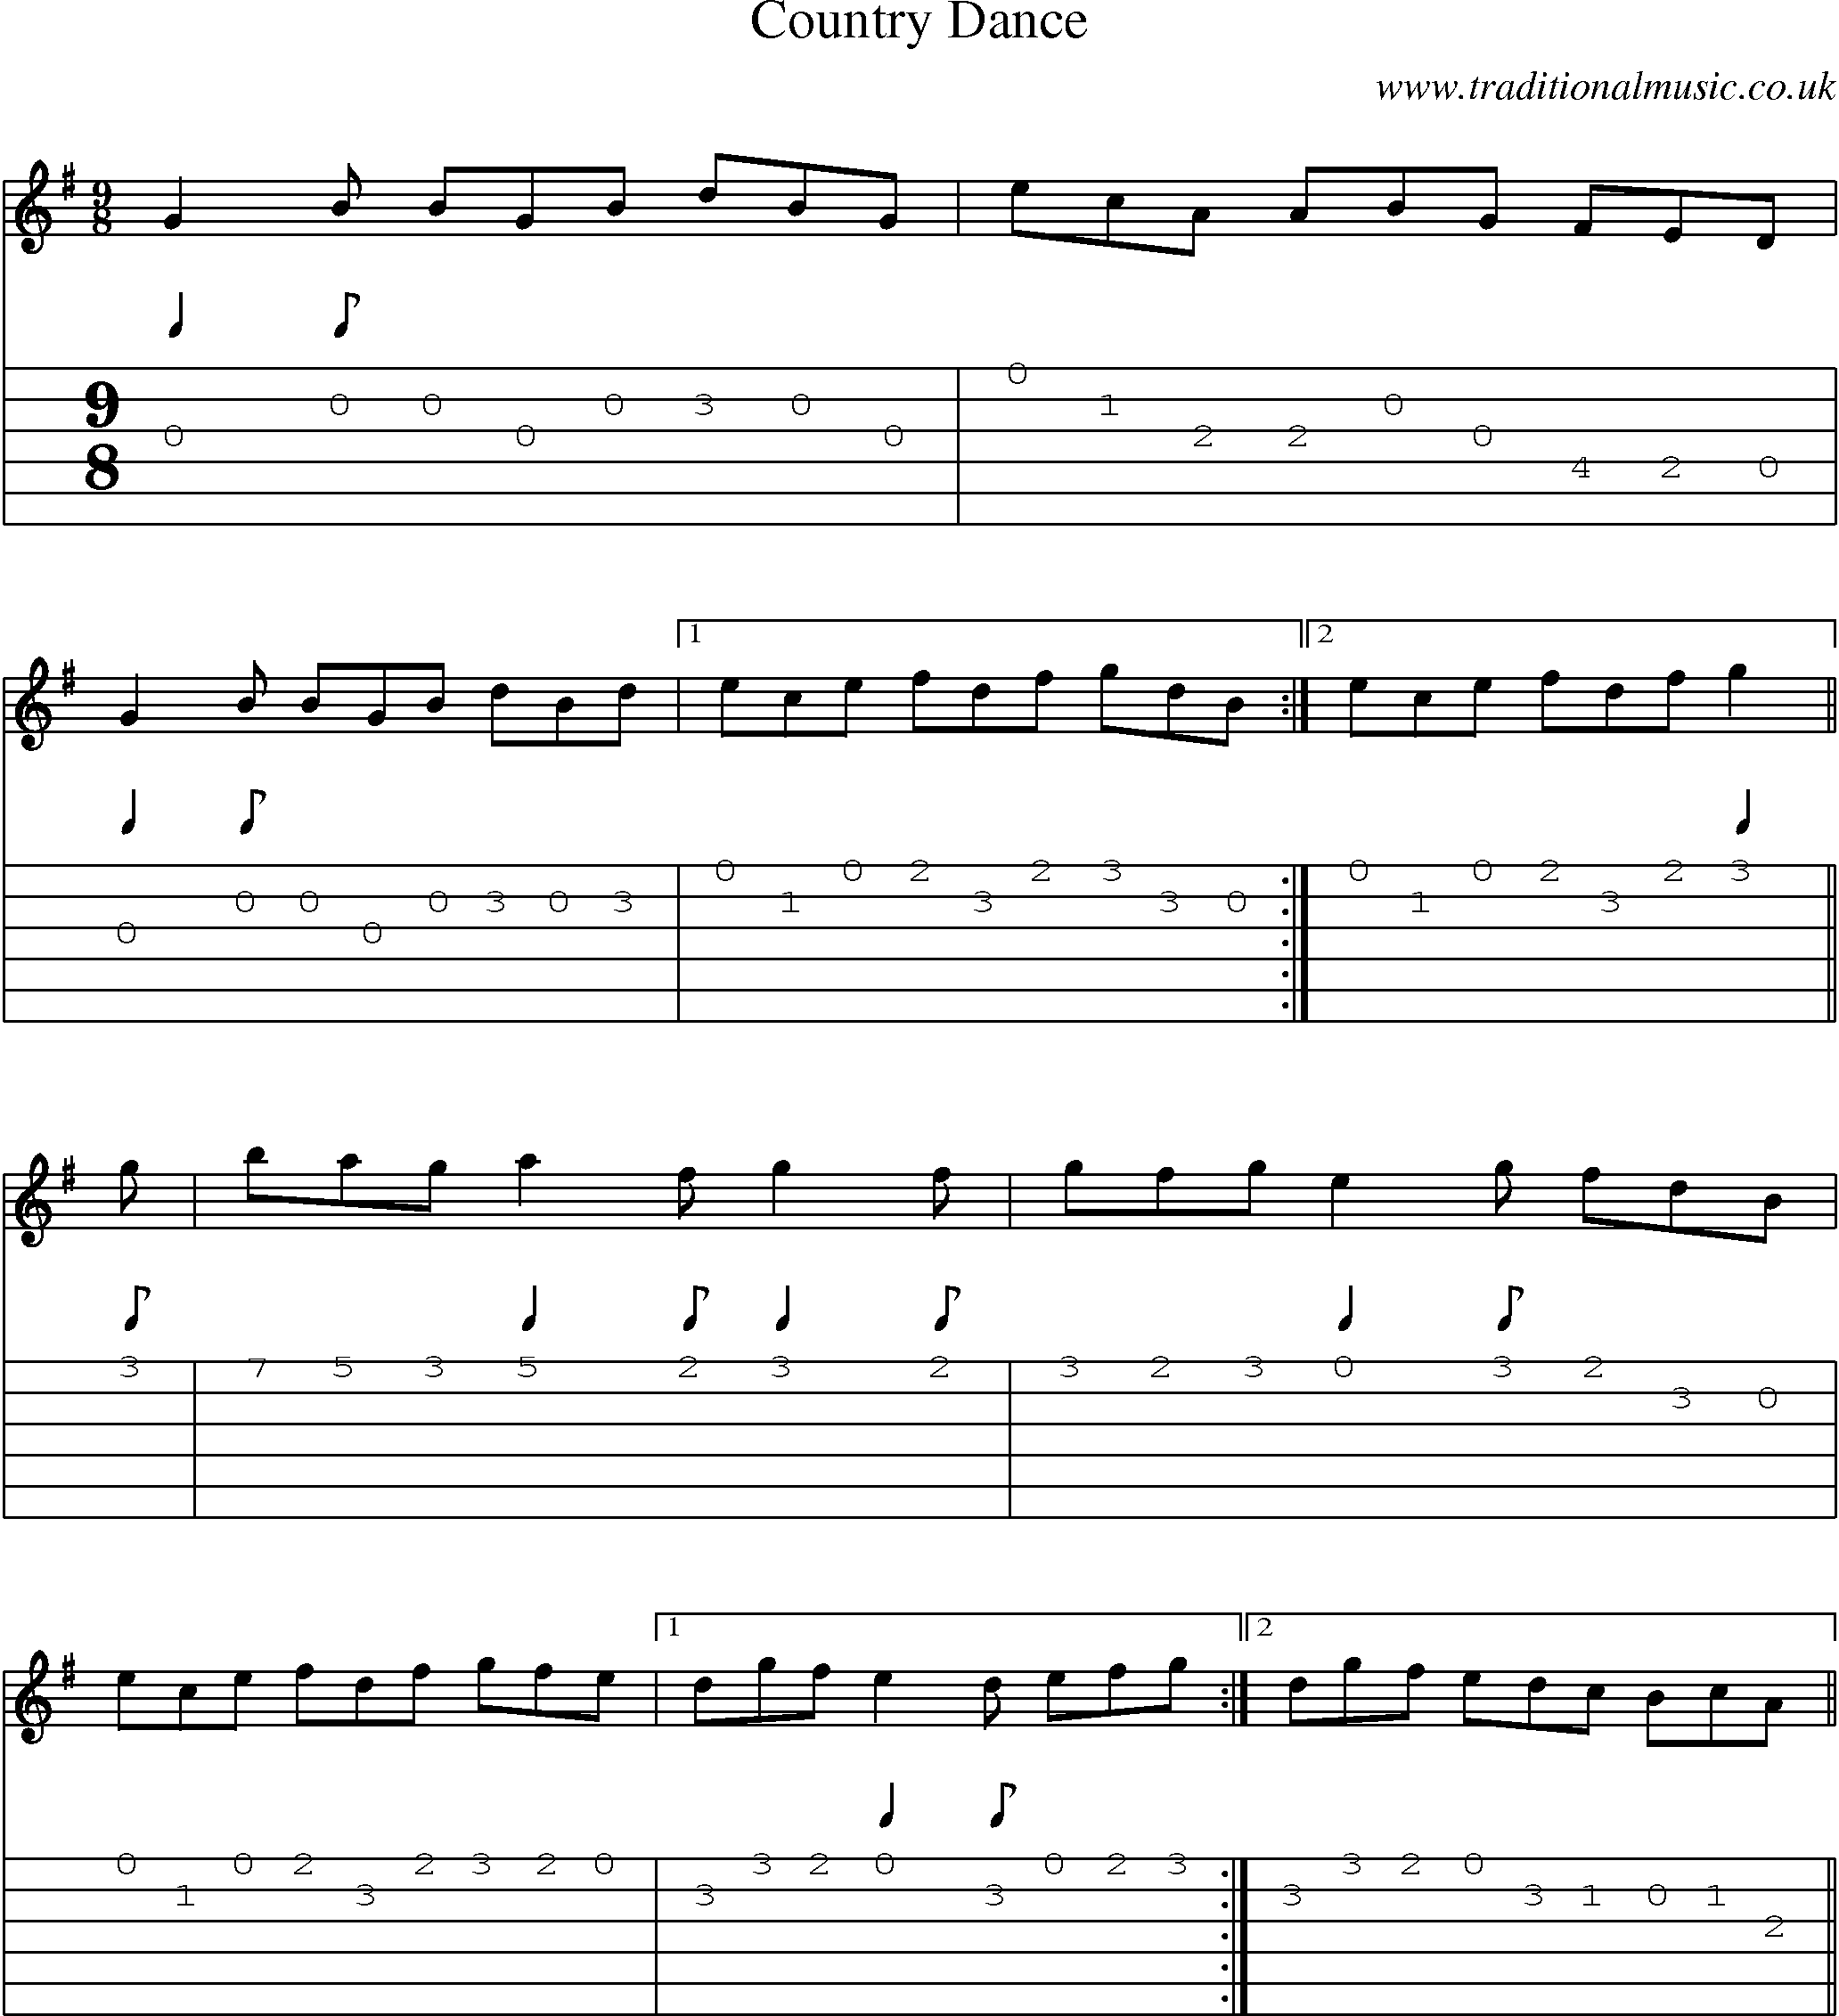 Music Score and Guitar Tabs for Country Dance